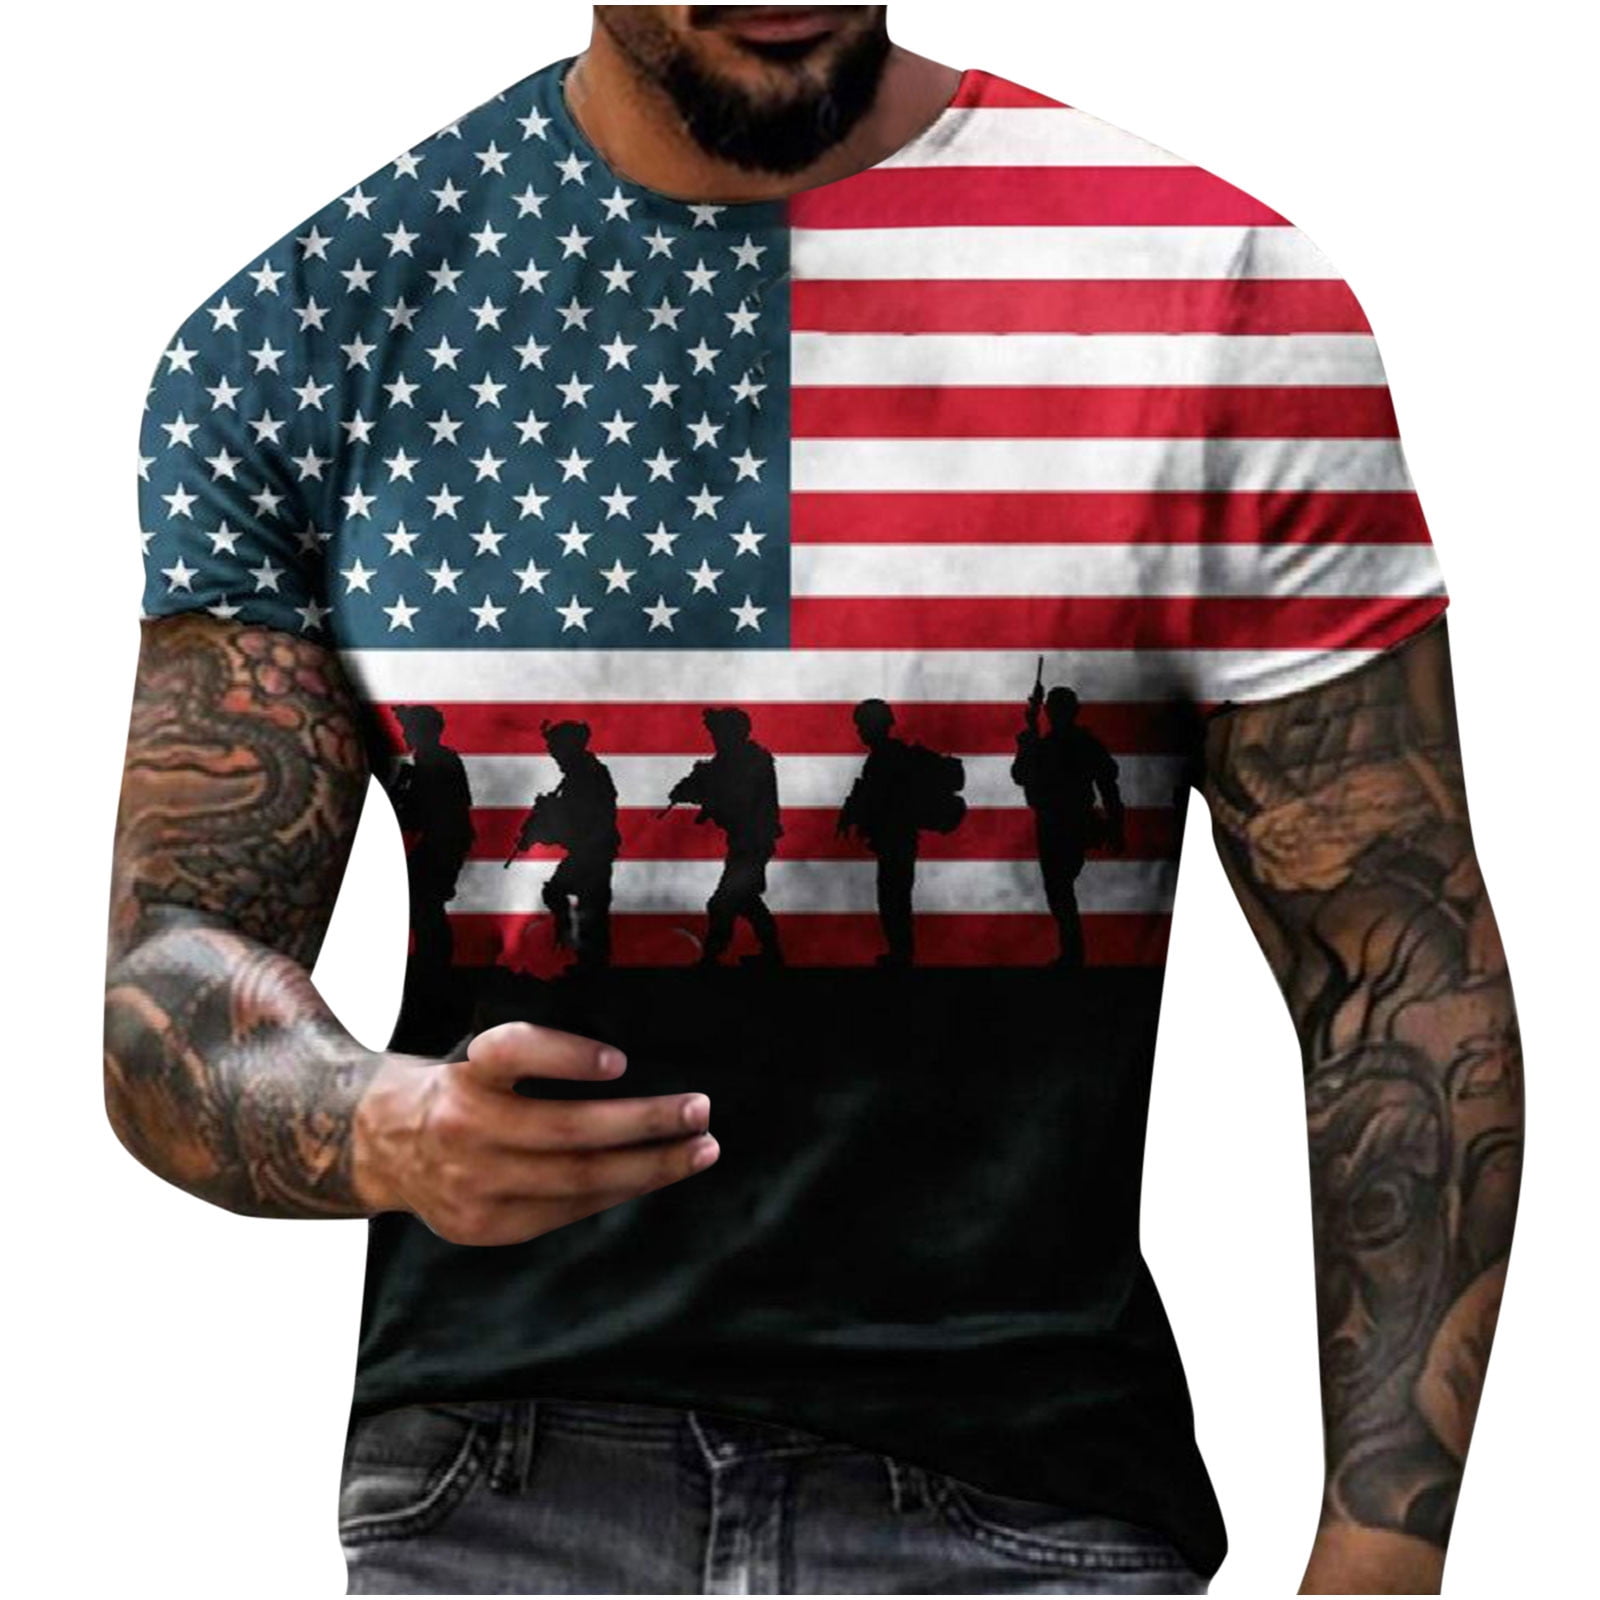 Men's American Flag T-Shirt Patriotic Tee Short Sleeve 4Th of July Apperal Abstract Workout Muscle T Shirts 